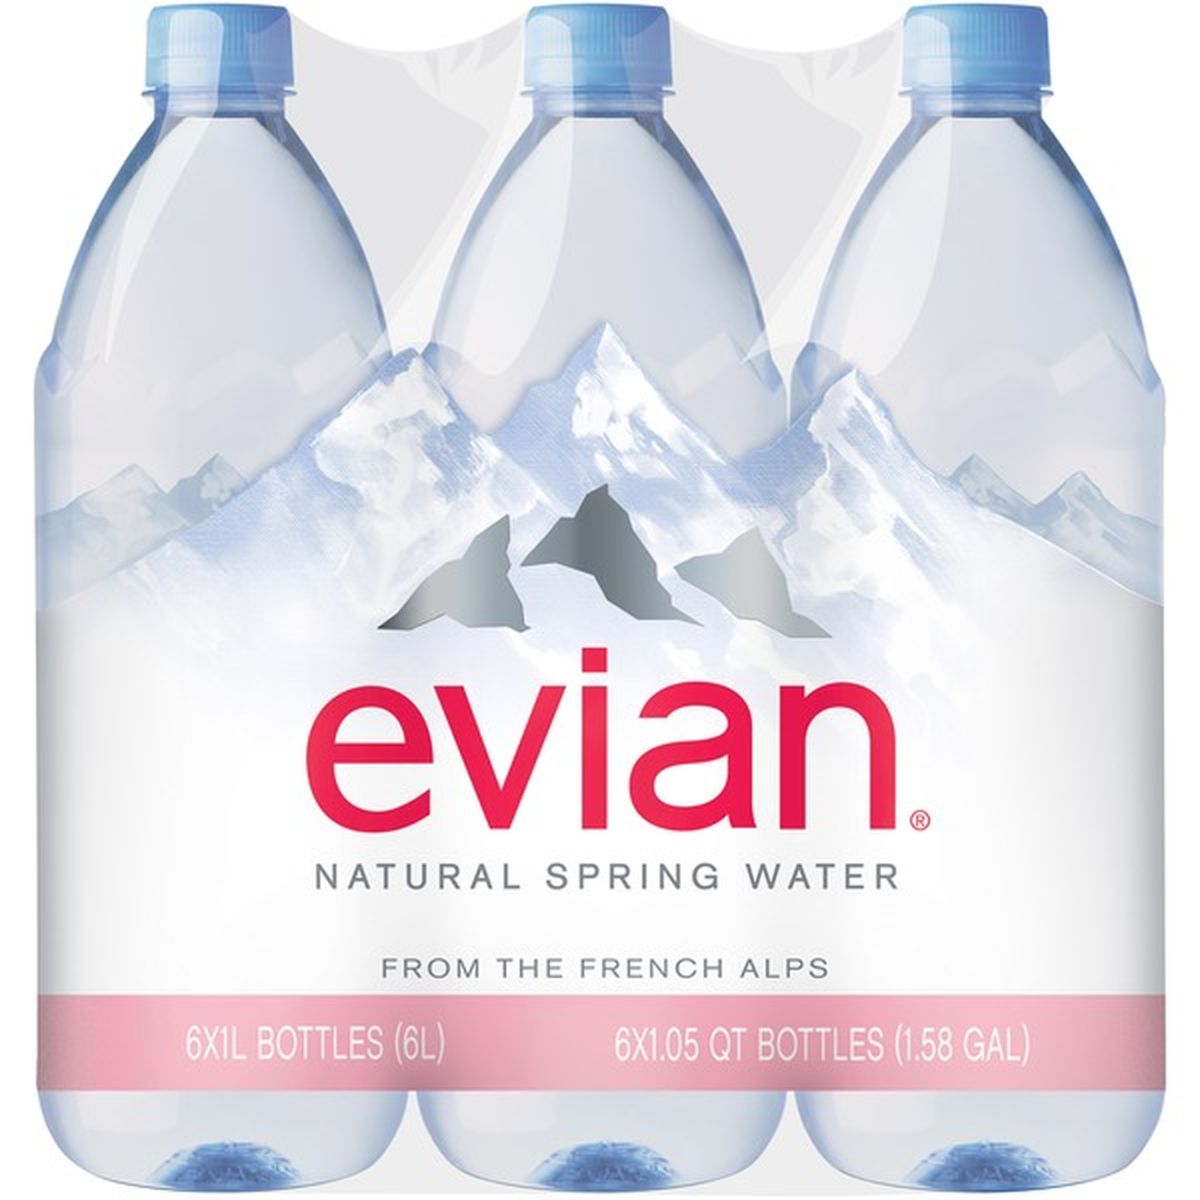 Evian Natural Mineral Water 1L Bottles (Box of 12)